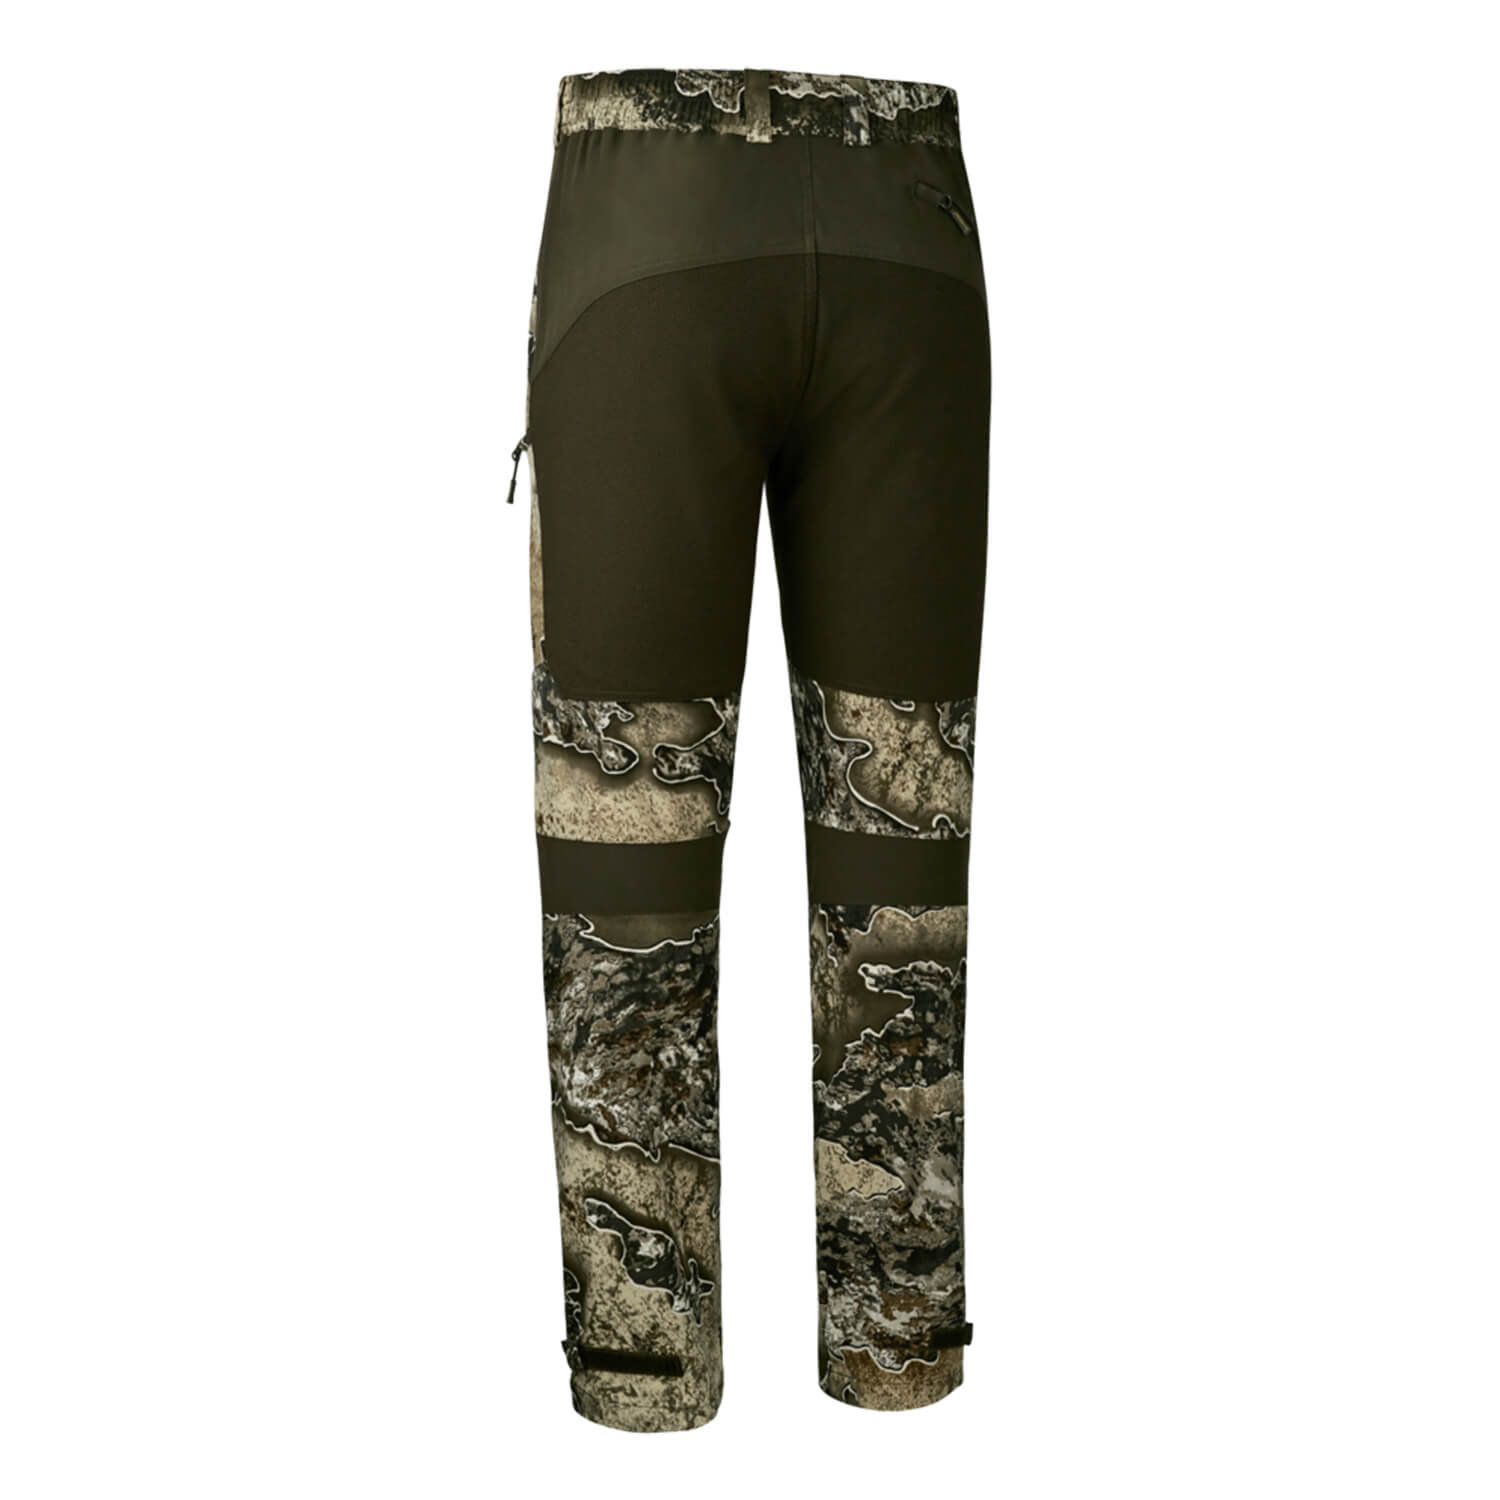 Deerhunter Trousers Excape Light (Realtree Excape)